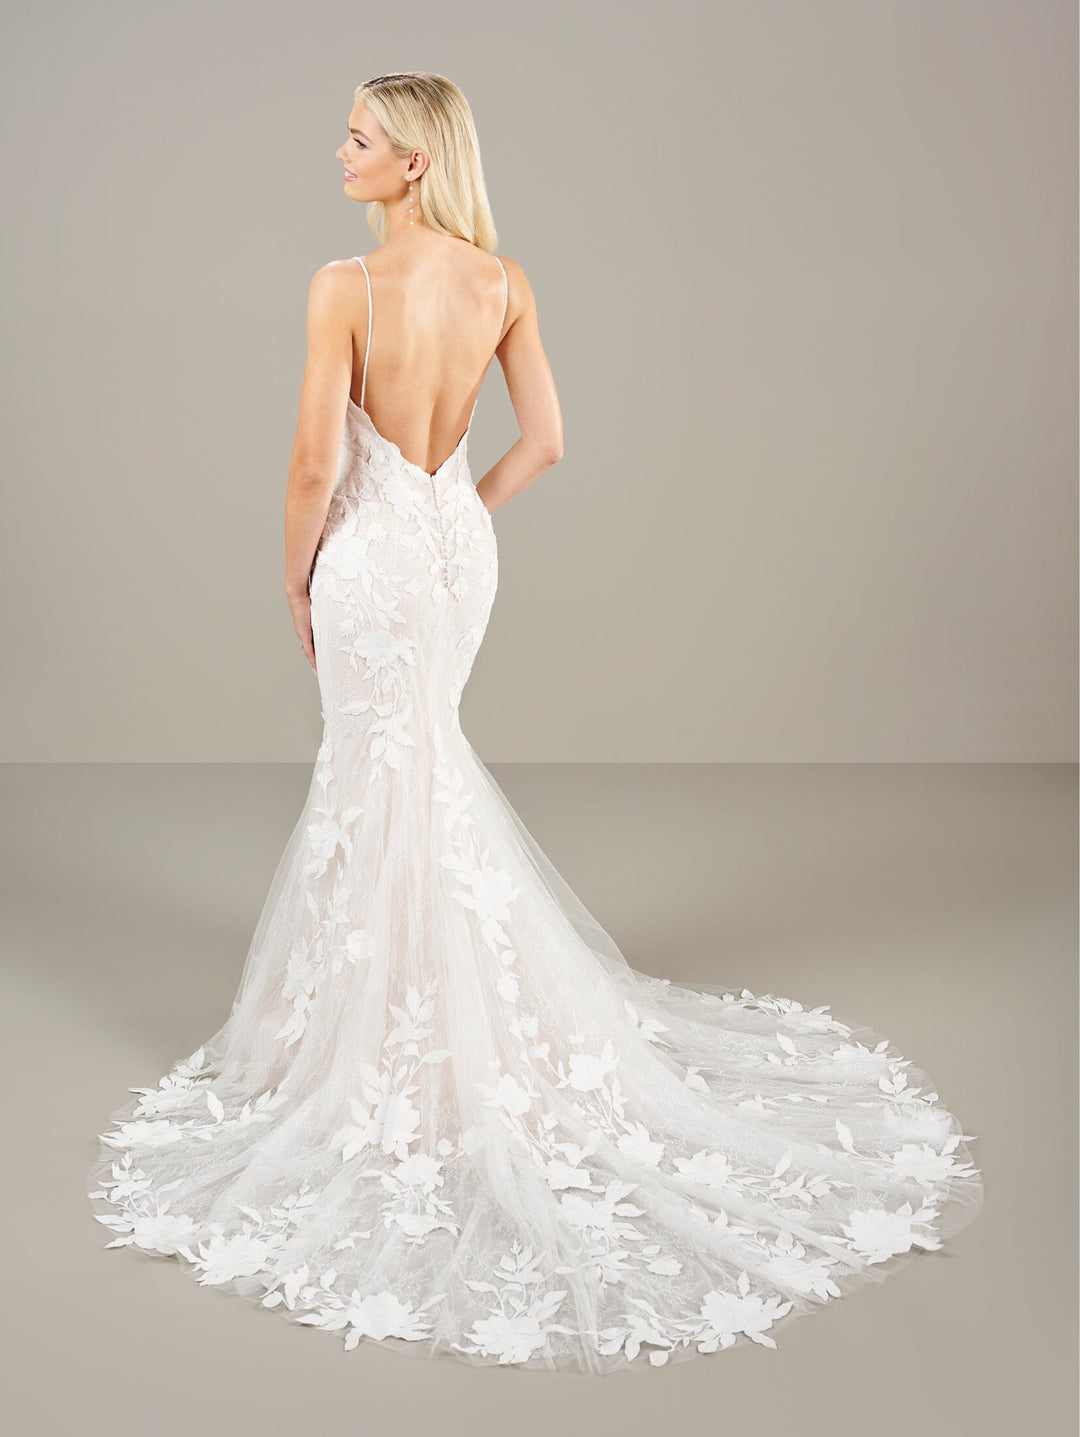 Applique Sleeveless Mermaid Bridal Gown by Adrianna Papell 31281